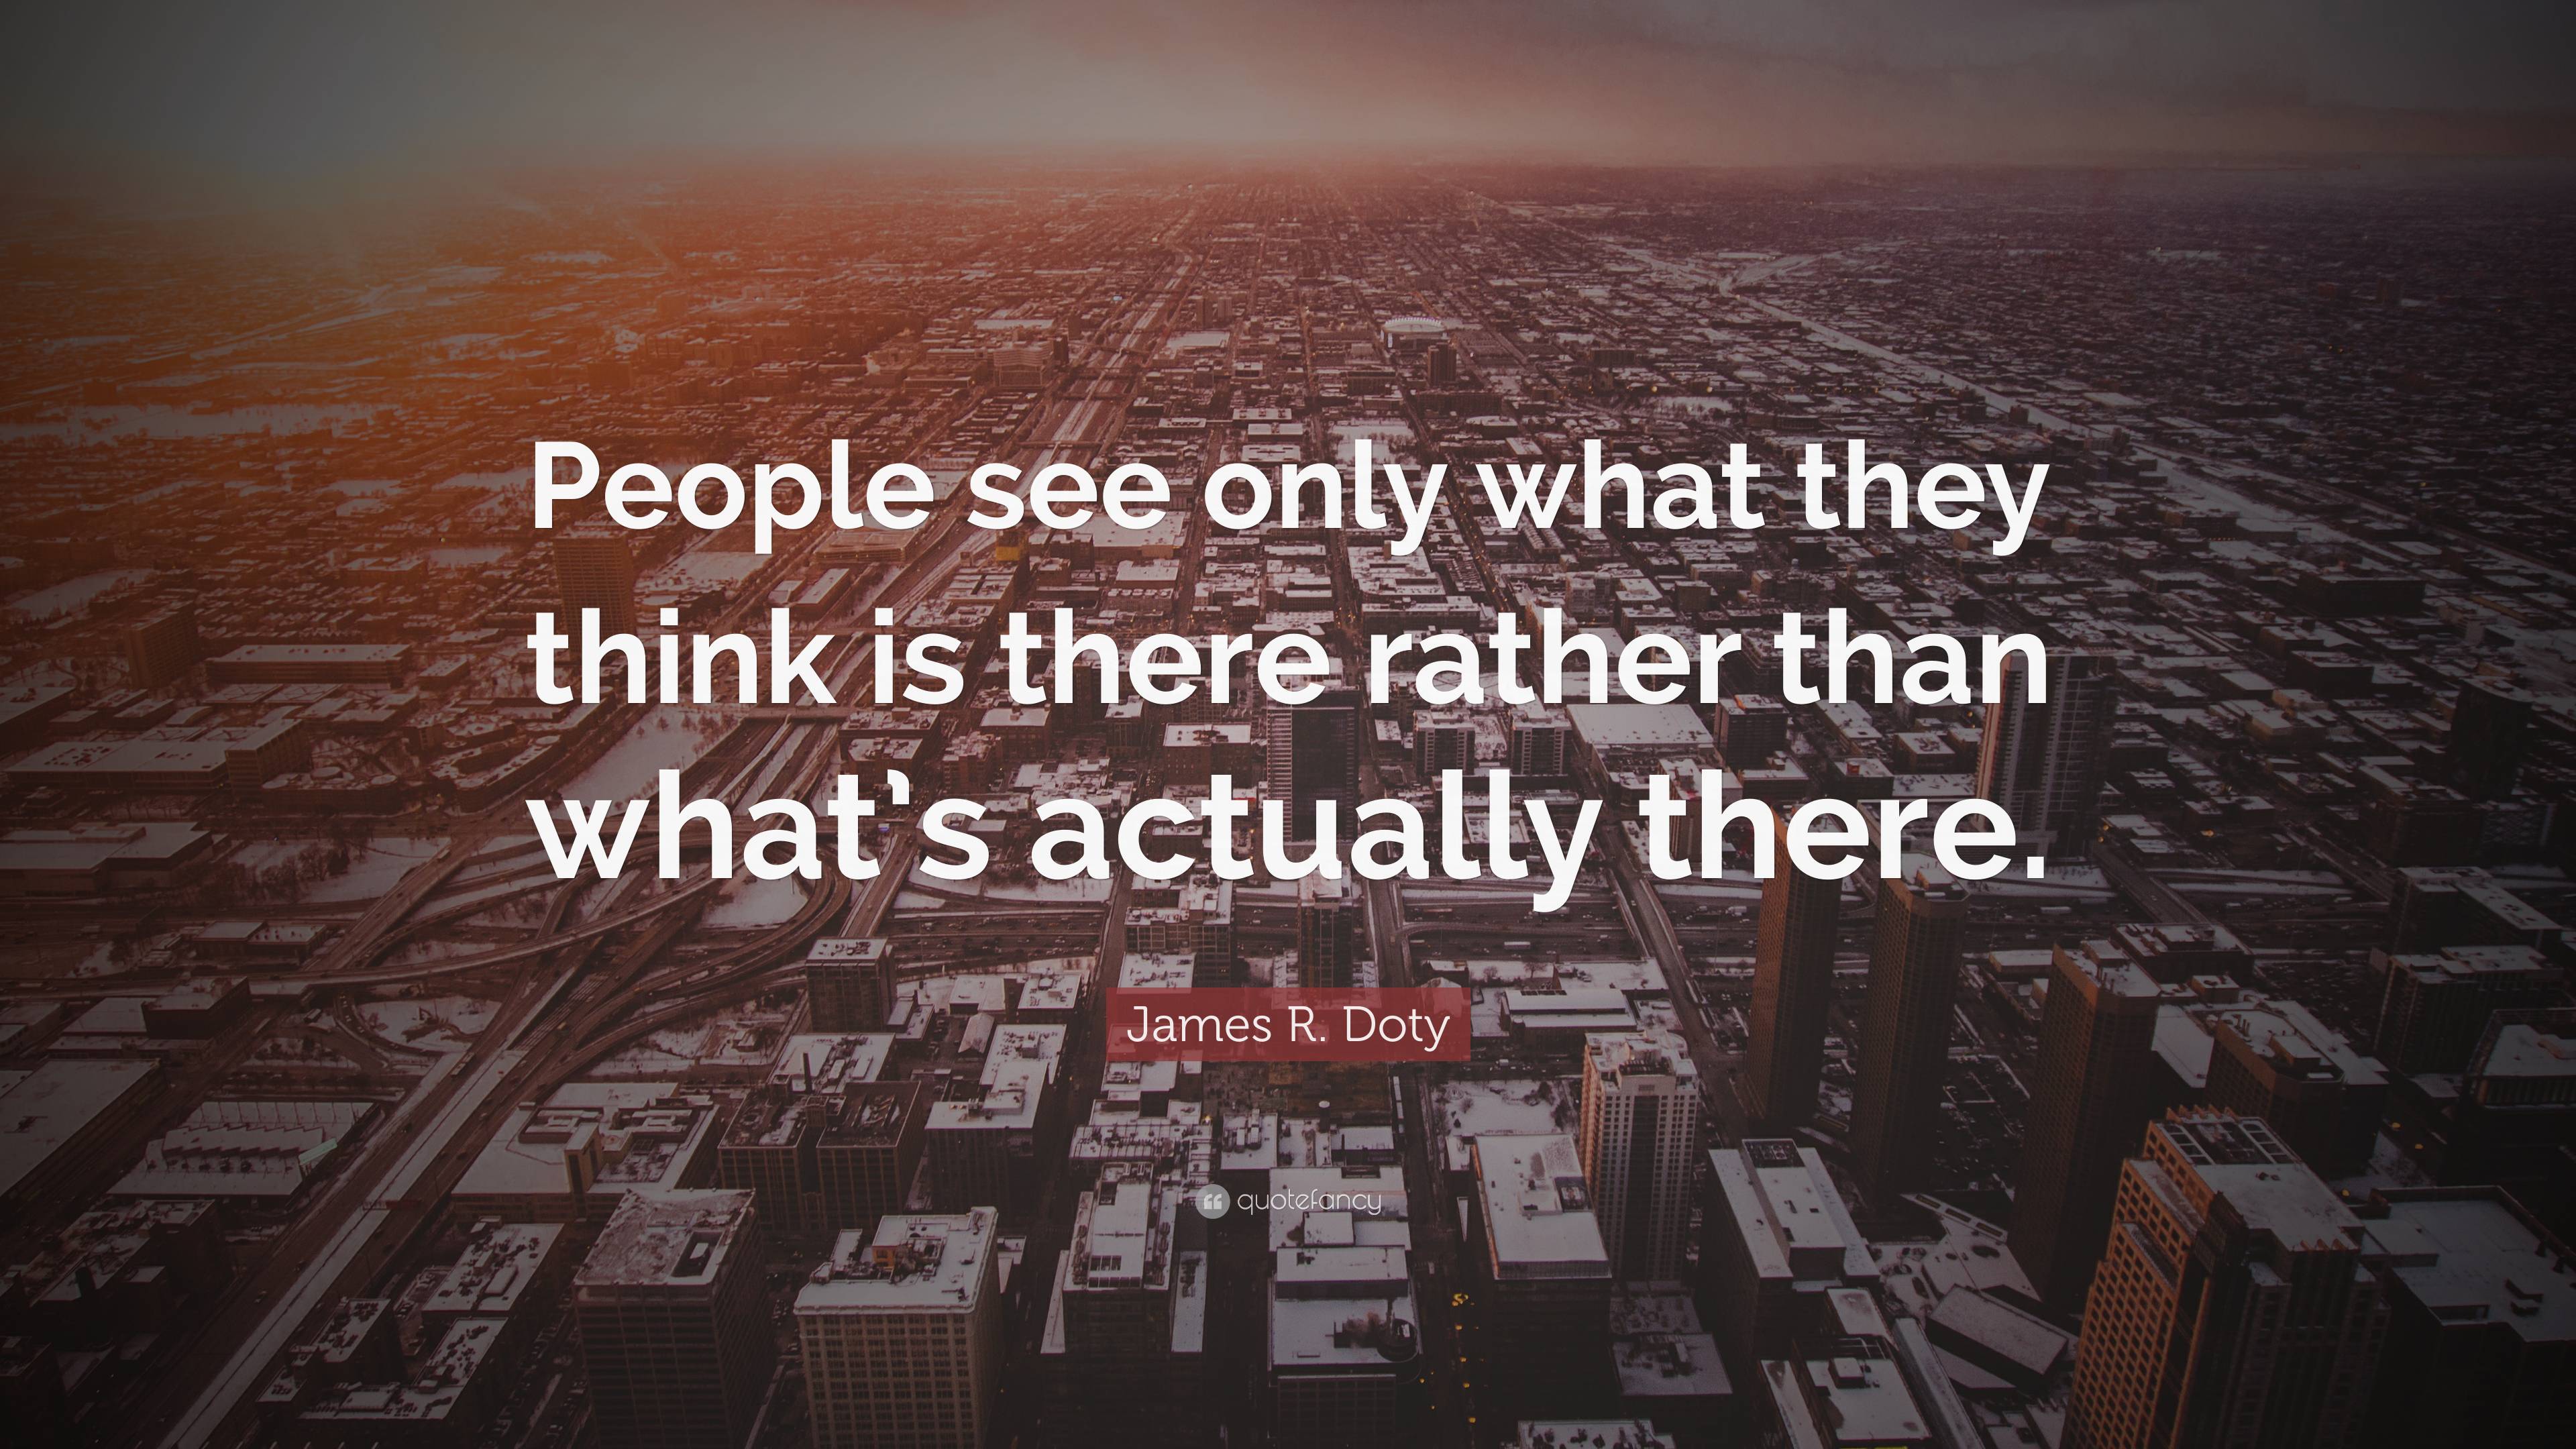 James R. Doty Quote: “People see only what they think is there rather ...